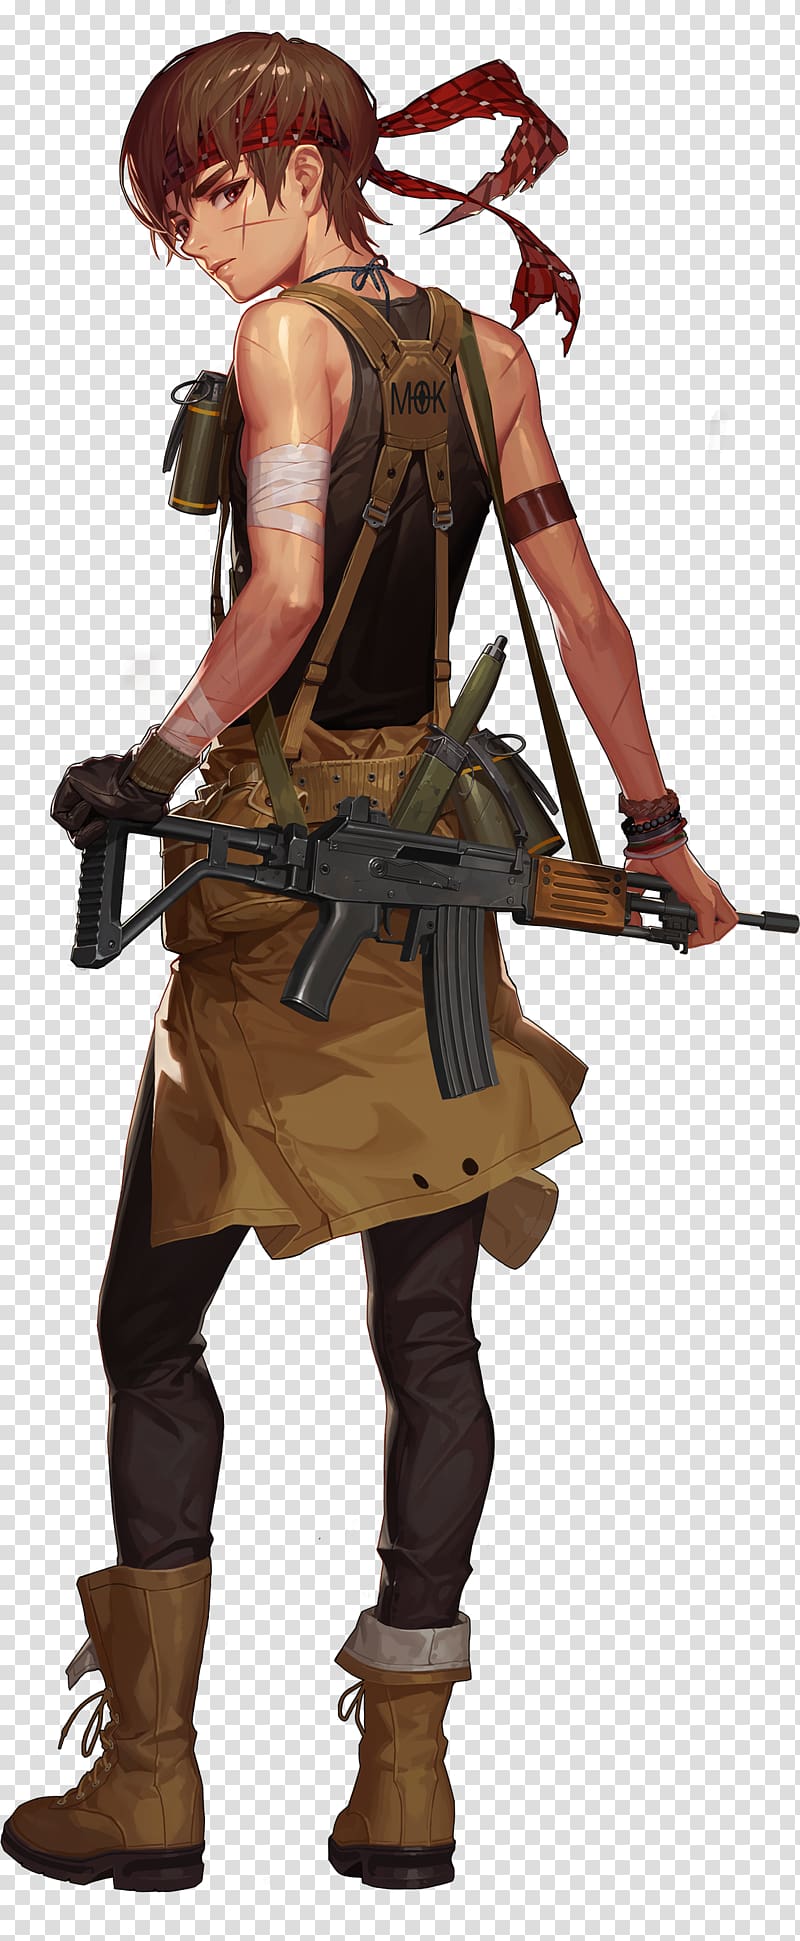 black survival character concept art drawing rules of survival transparent background png clipart hiclipart black survival character concept art